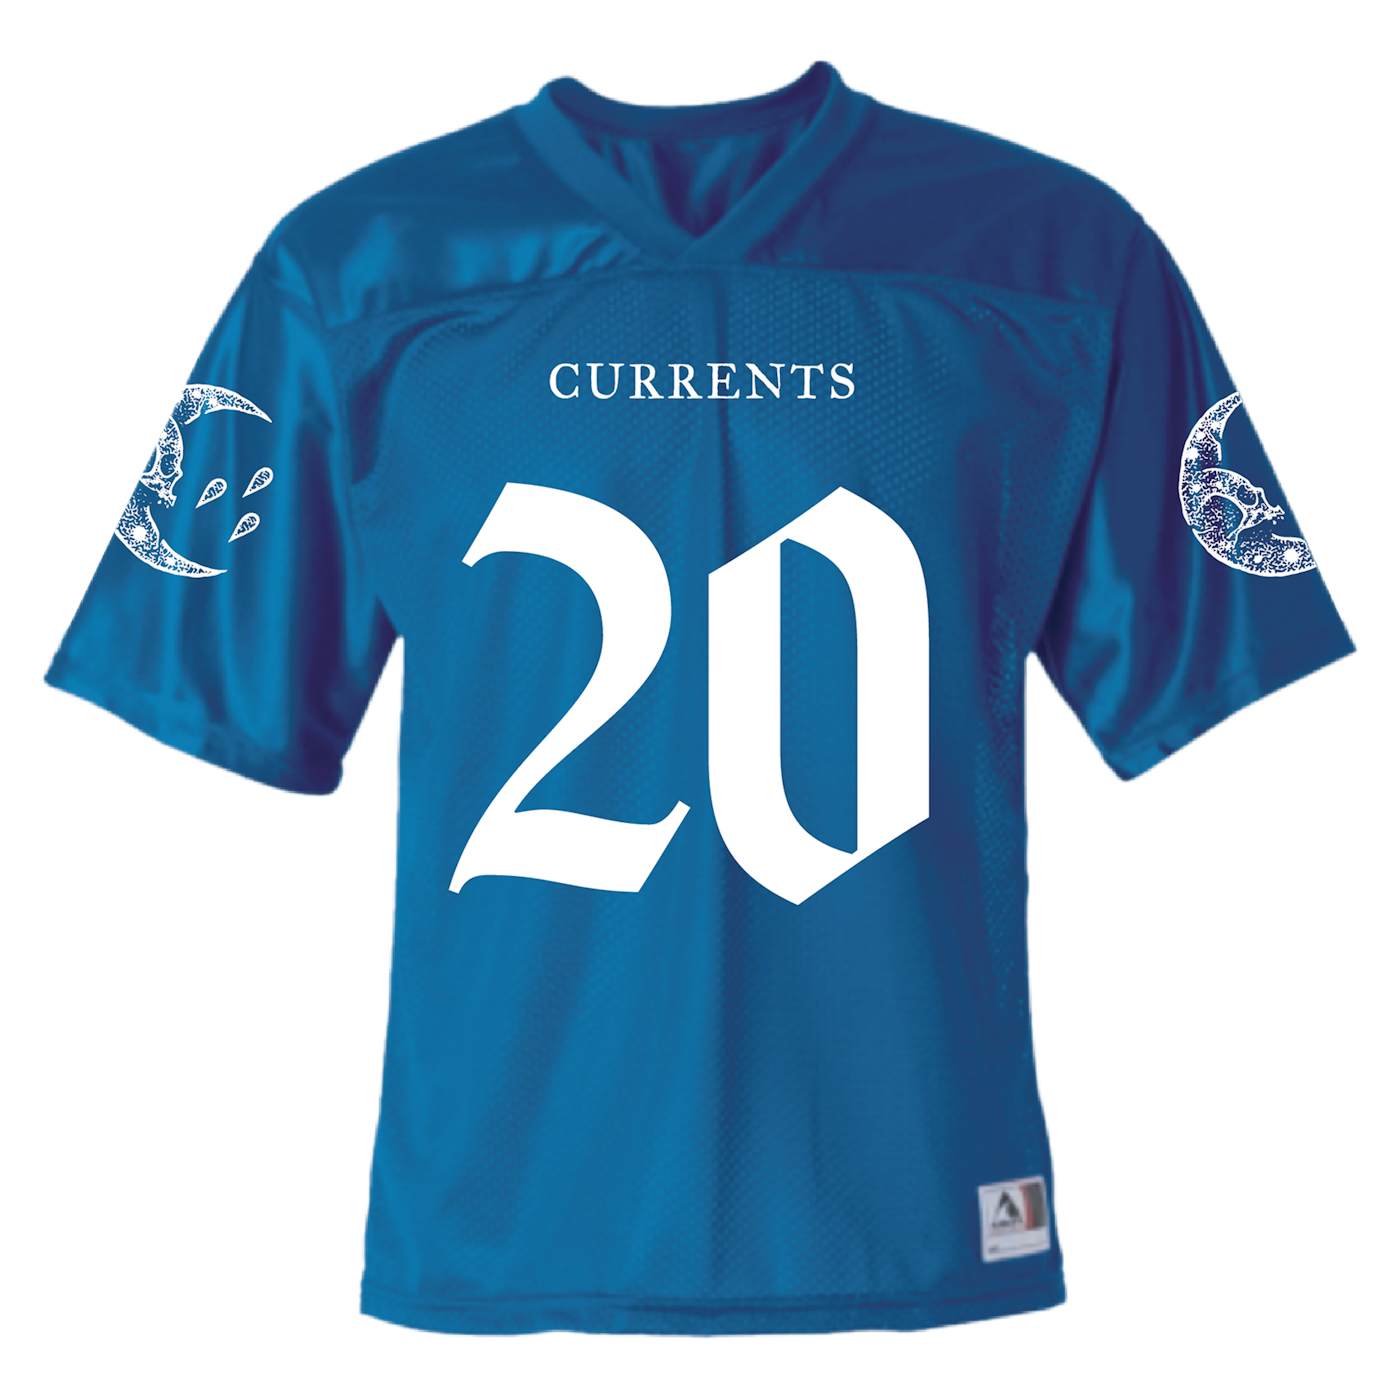 Currents Football Jersey